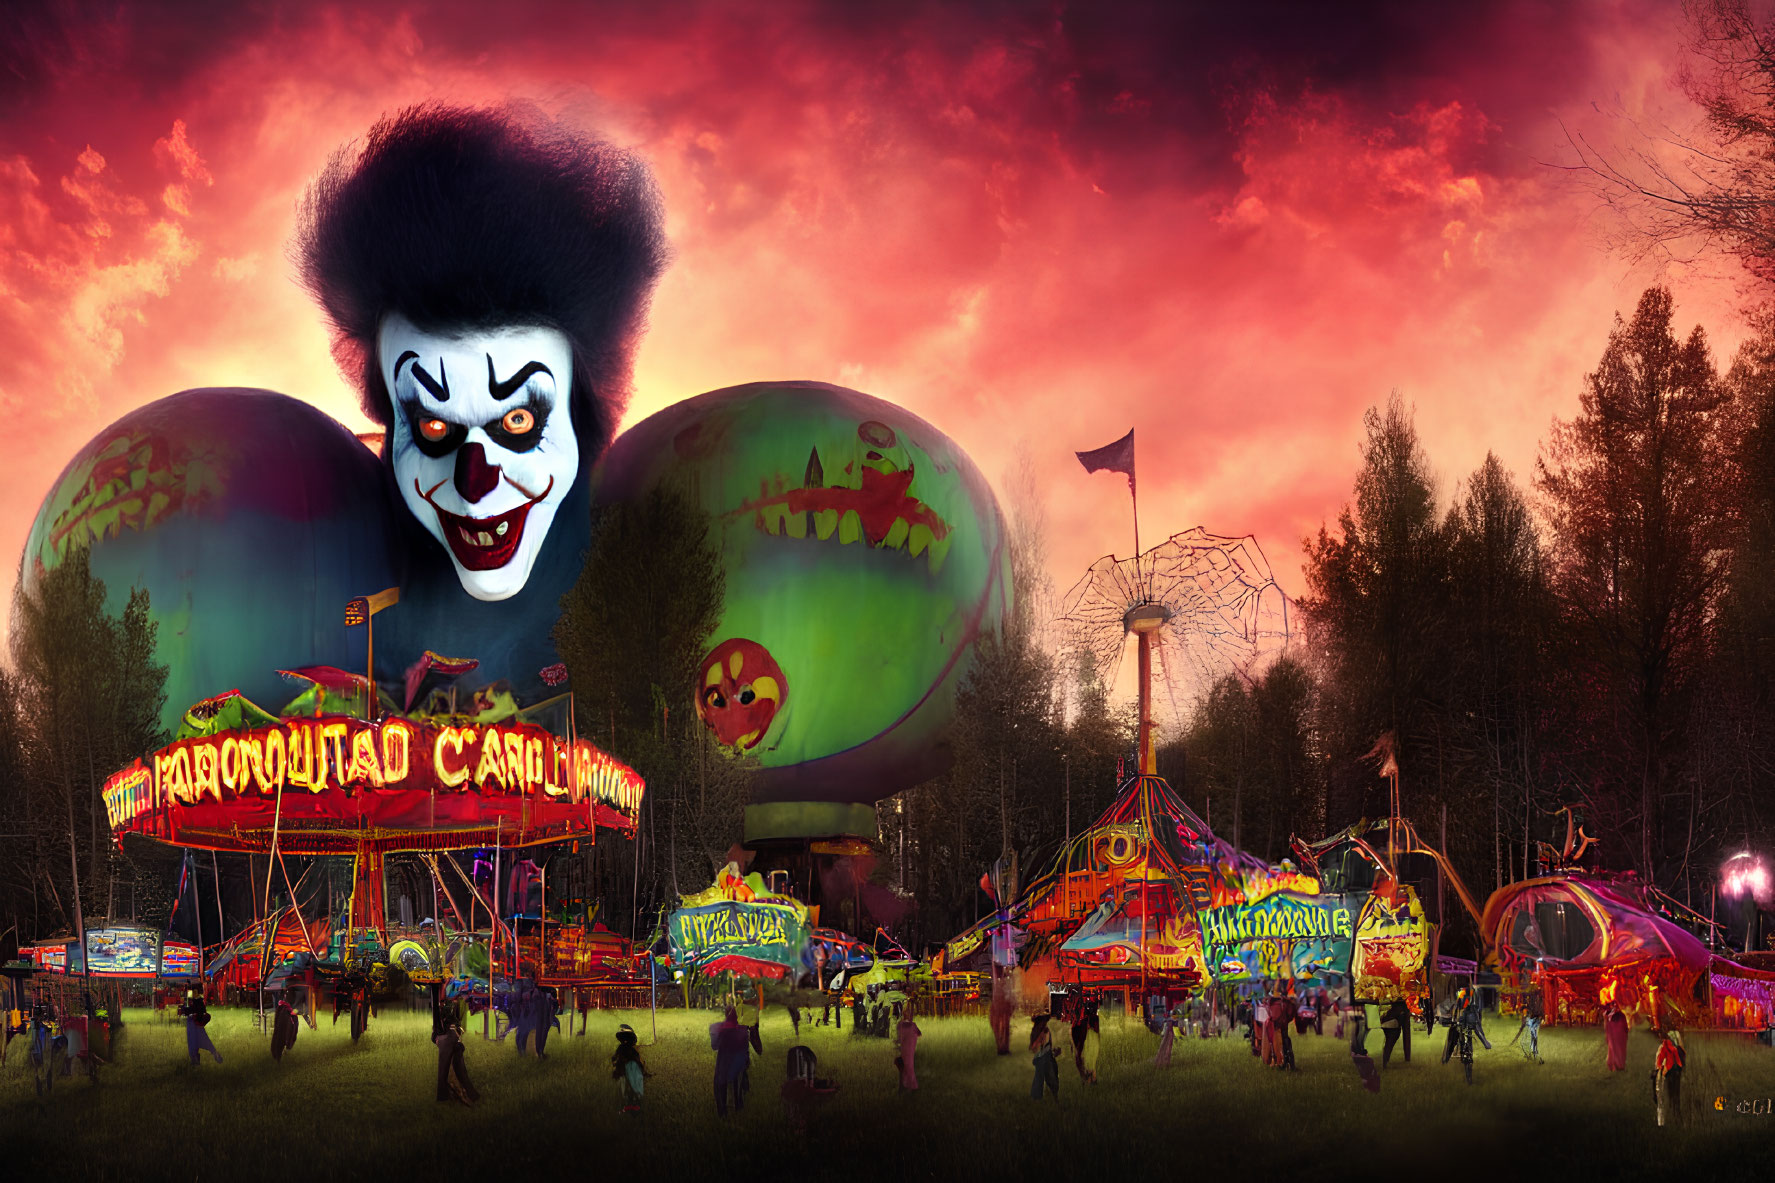 Eerie carnival scene at dusk with clown-faced entrance & haunted attractions